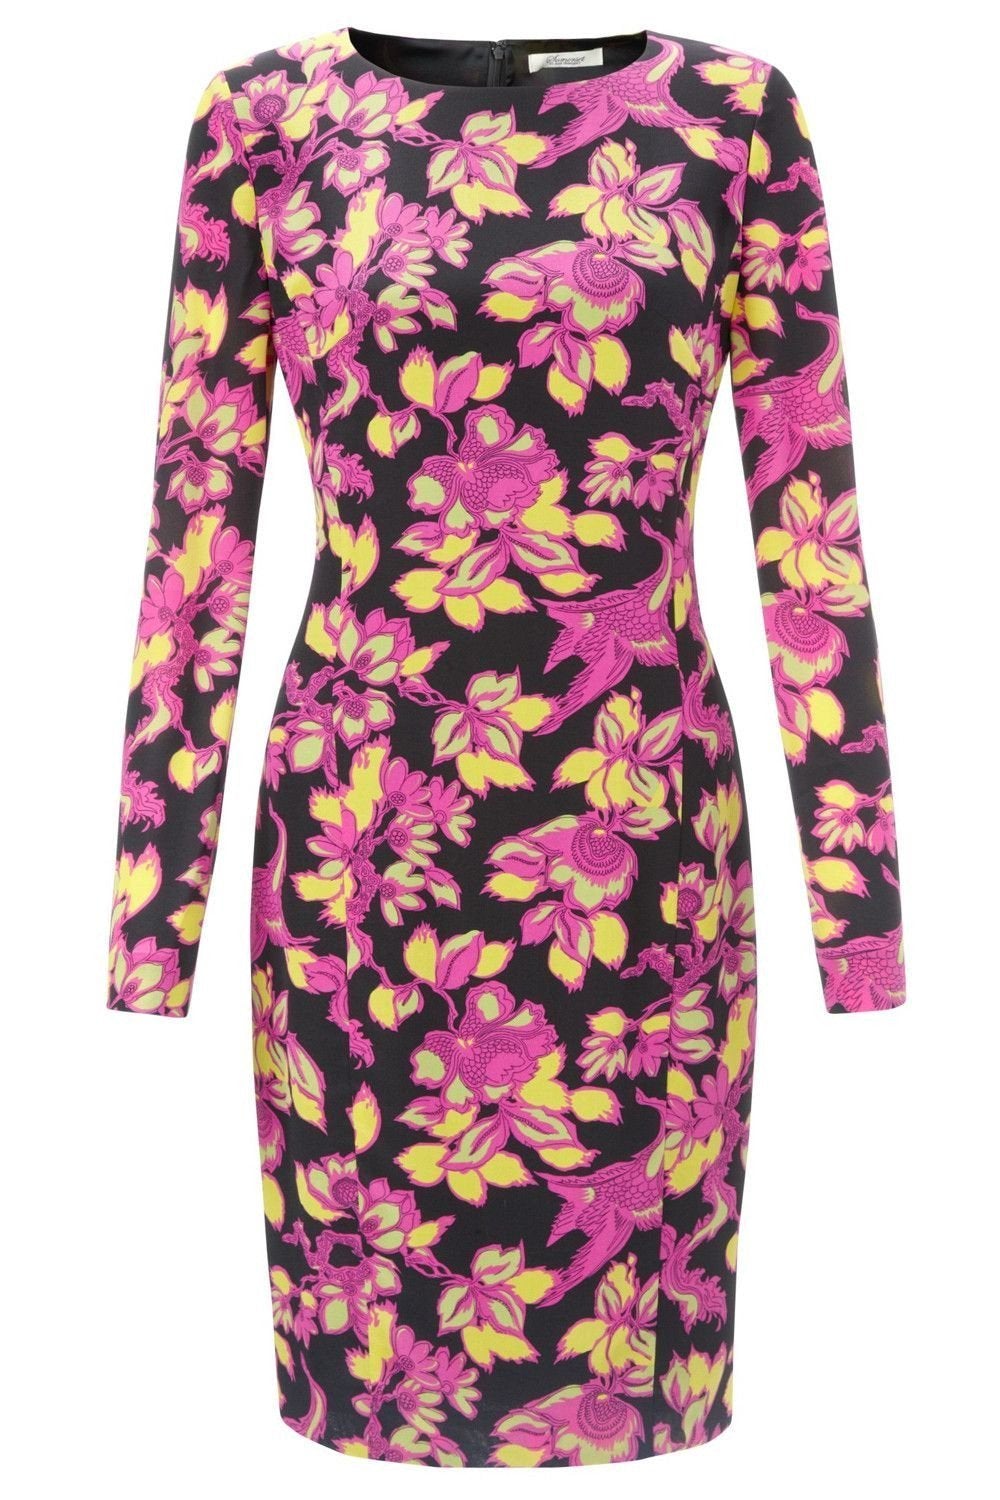 SOMERSET By ALICE TEMPERLEY Winter Floral Silk Dress-Somerset by Alice Temperley-The Freperie